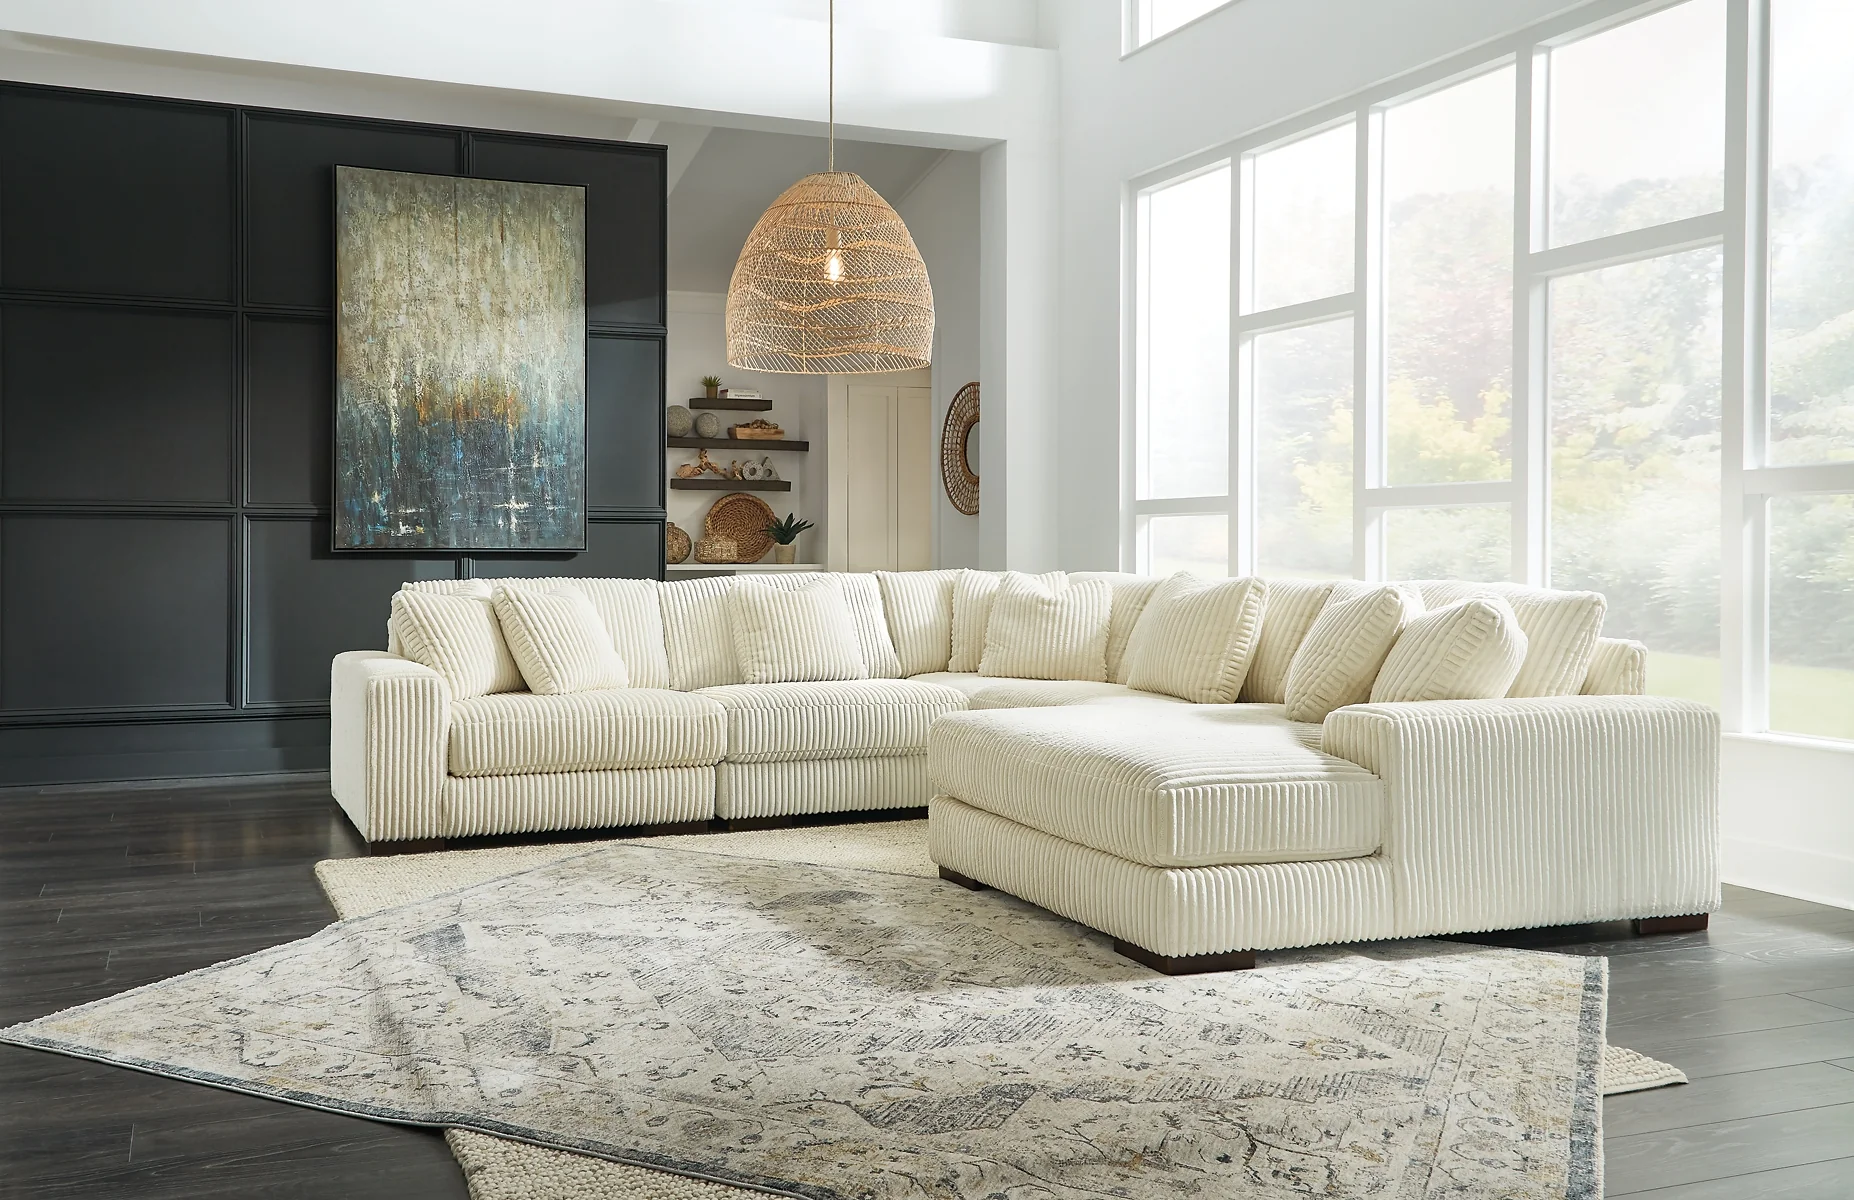 “Budget-Friendly Buys: Affordable Furniture Options for Every Budget”